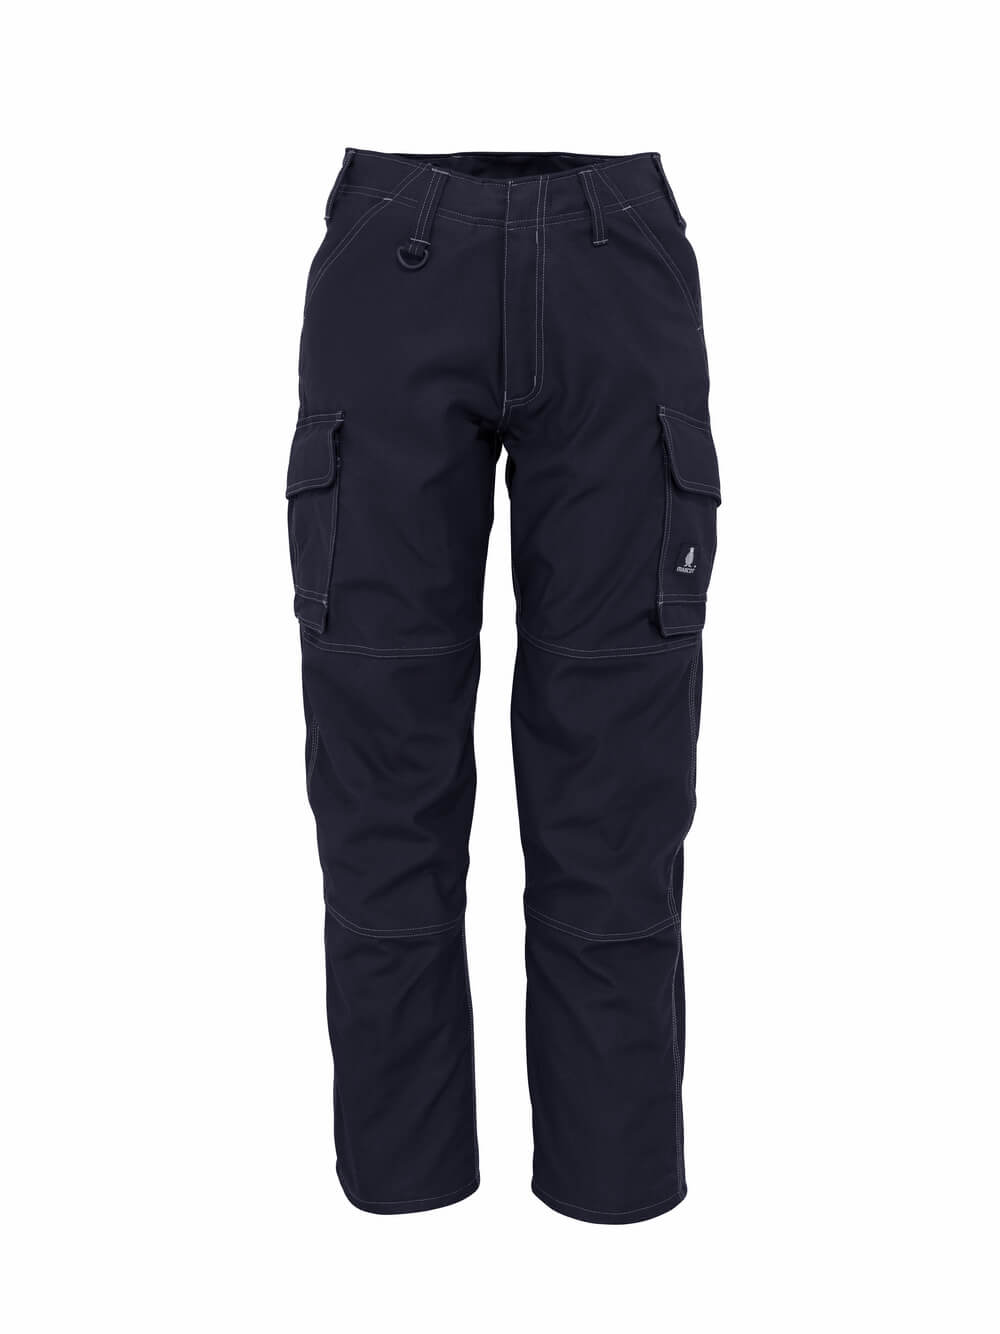 Mascot Workwear Trousers Accelerate 18531  Black  PAM Ties Limited   Basement Waterproofing And Damp Proofing